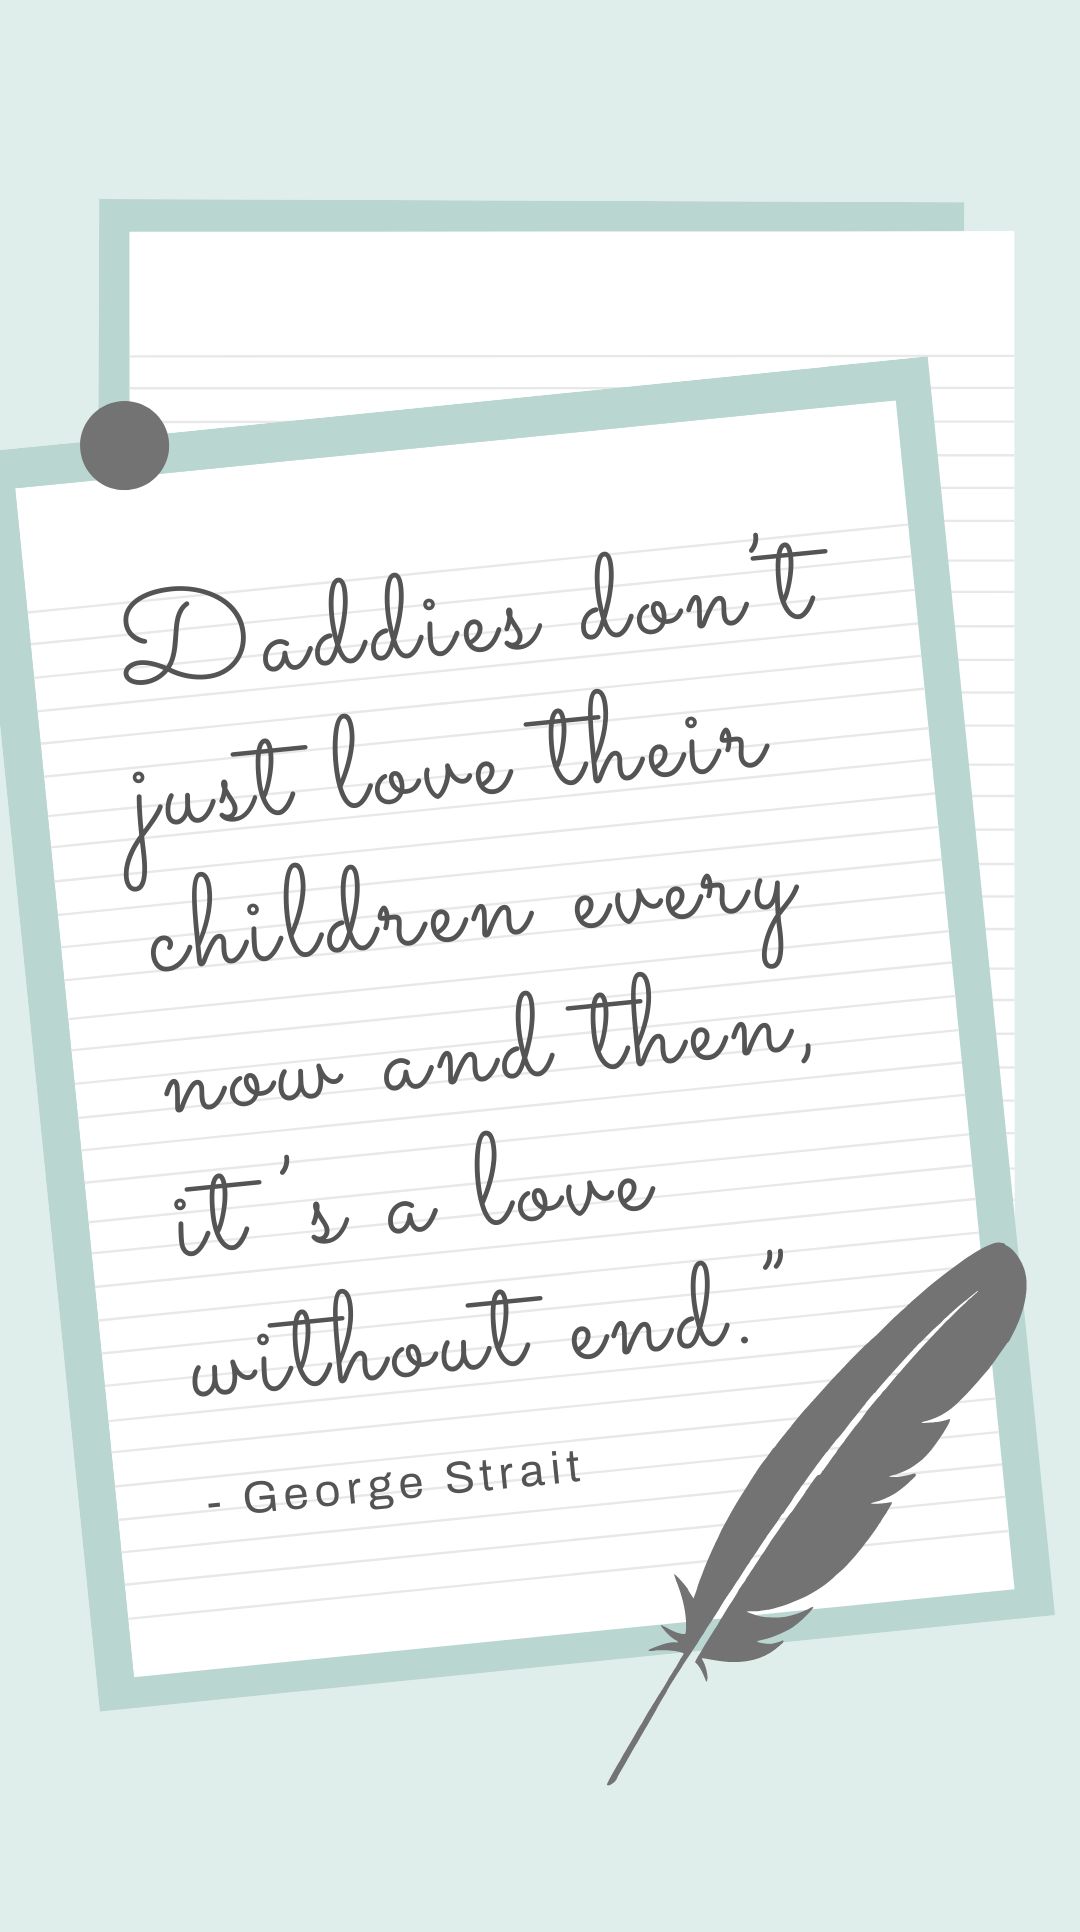 George Strait - “Daddies don’t just love their children every now and then, it’s a love without end.”